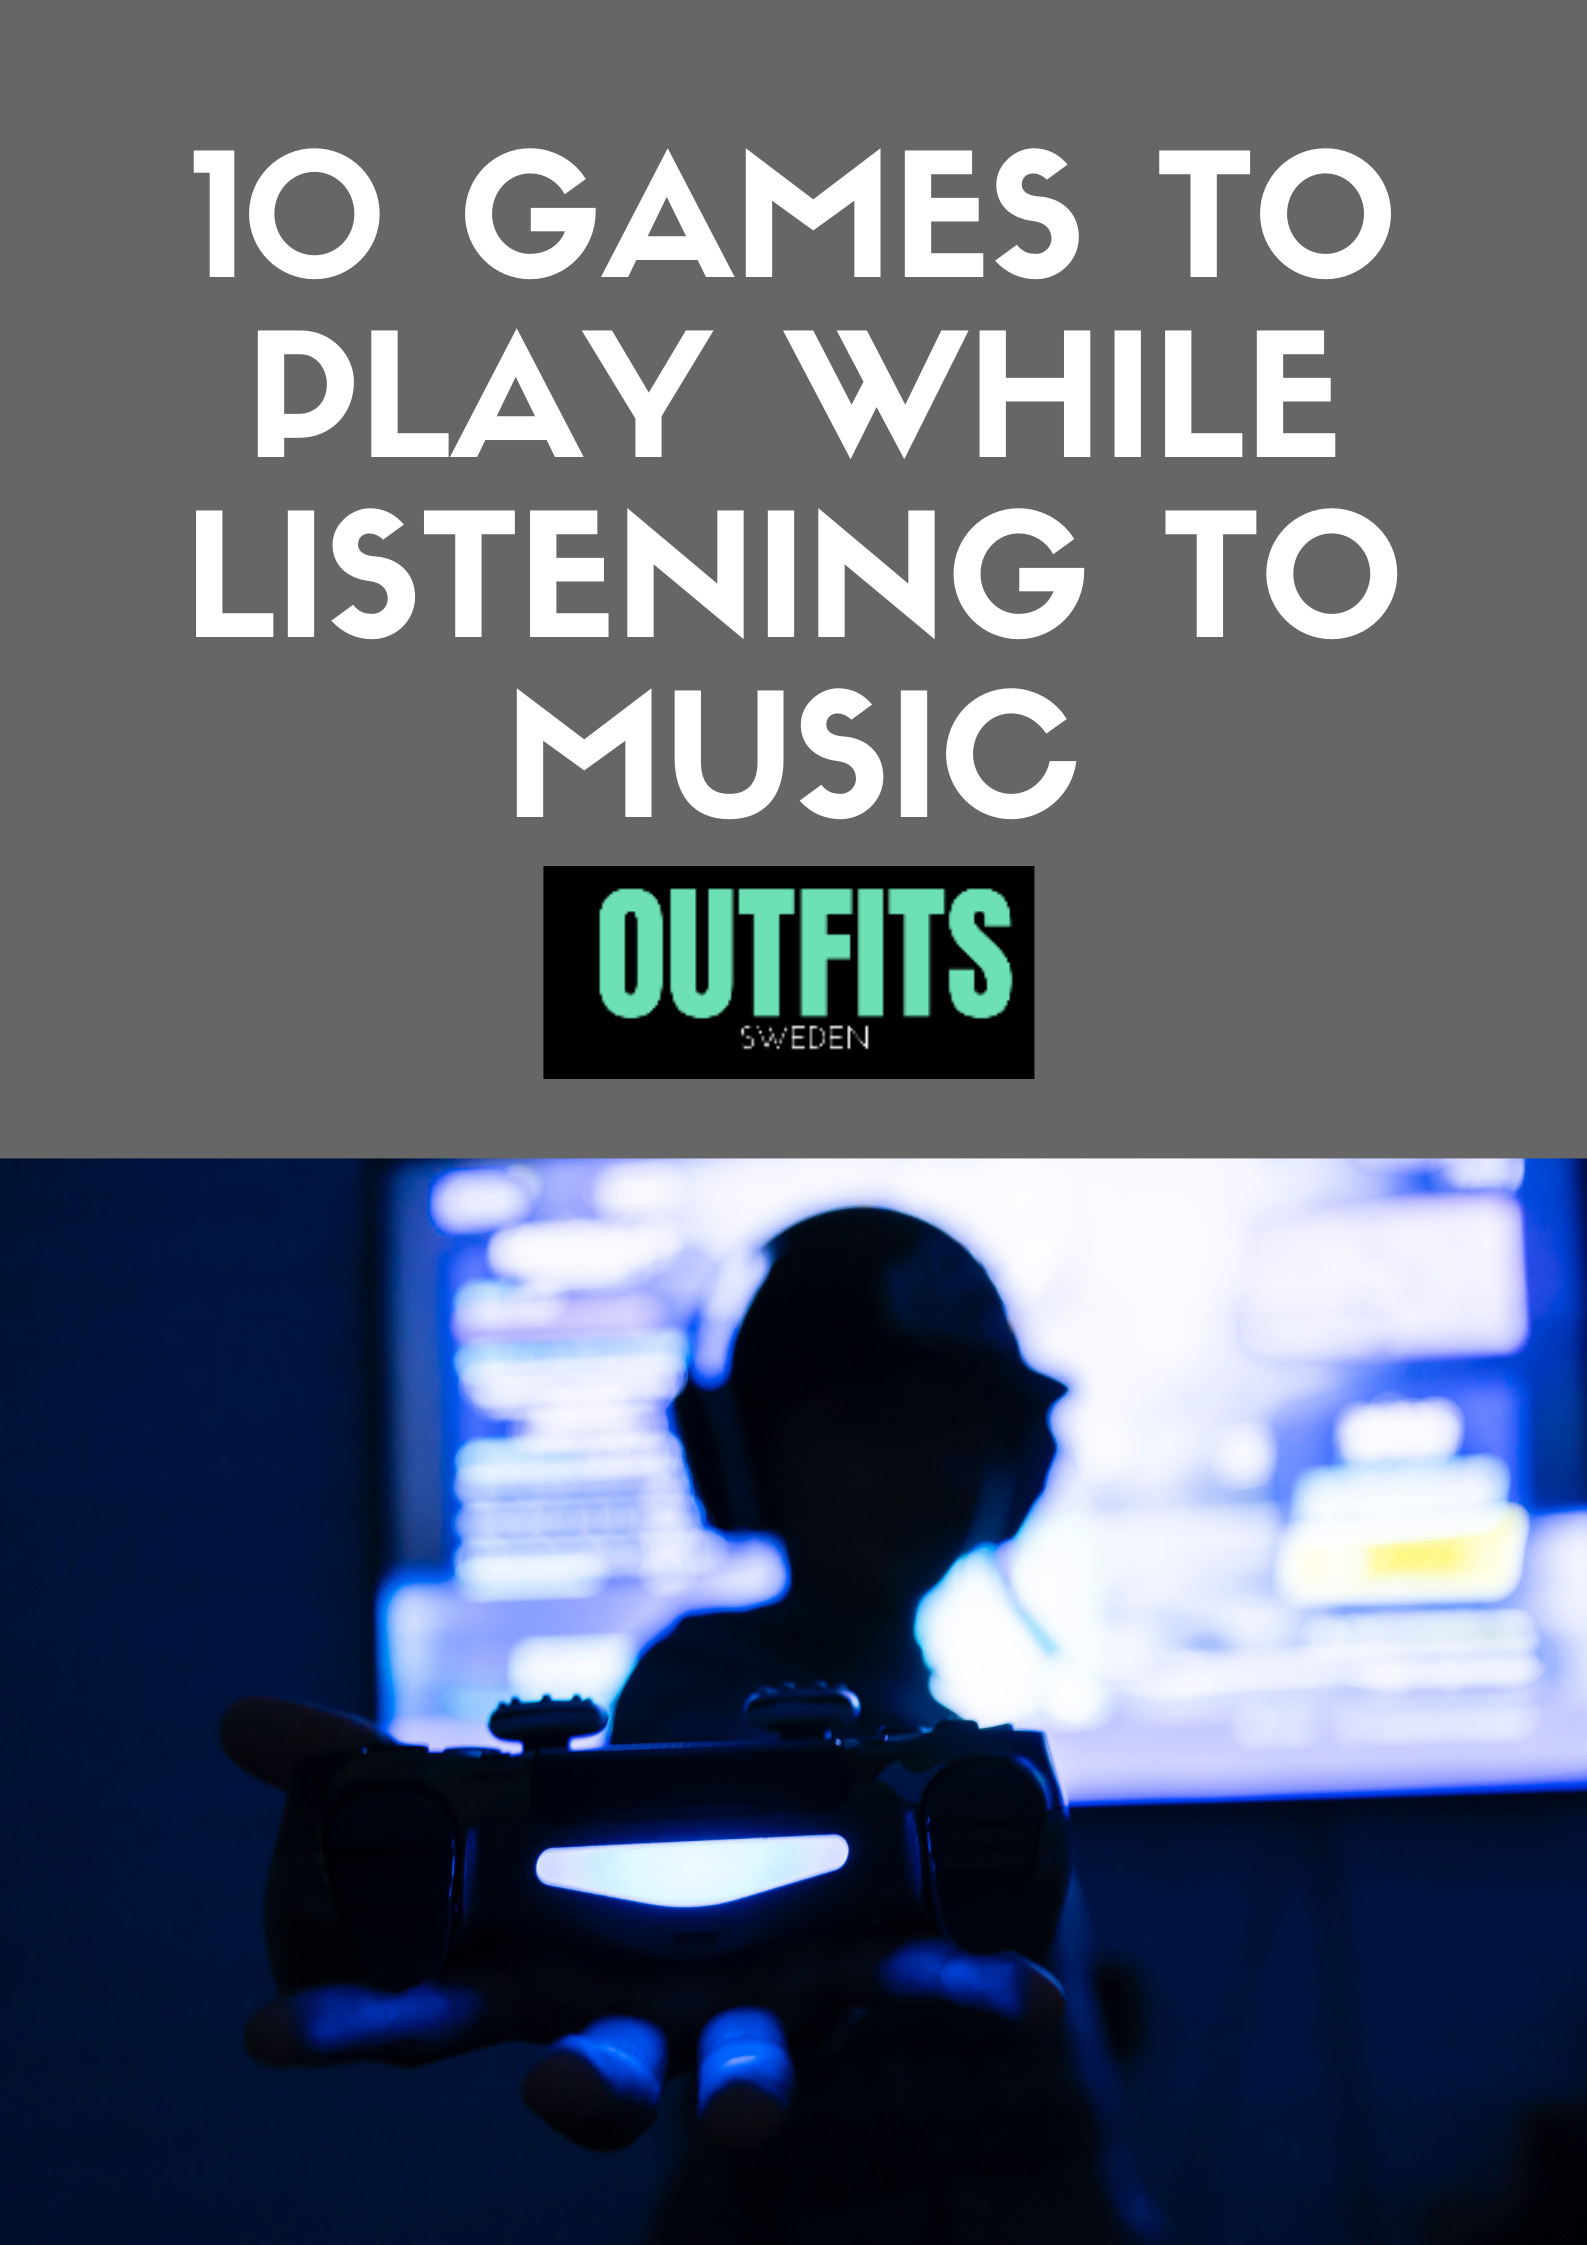 Games To Play While Listening To Music